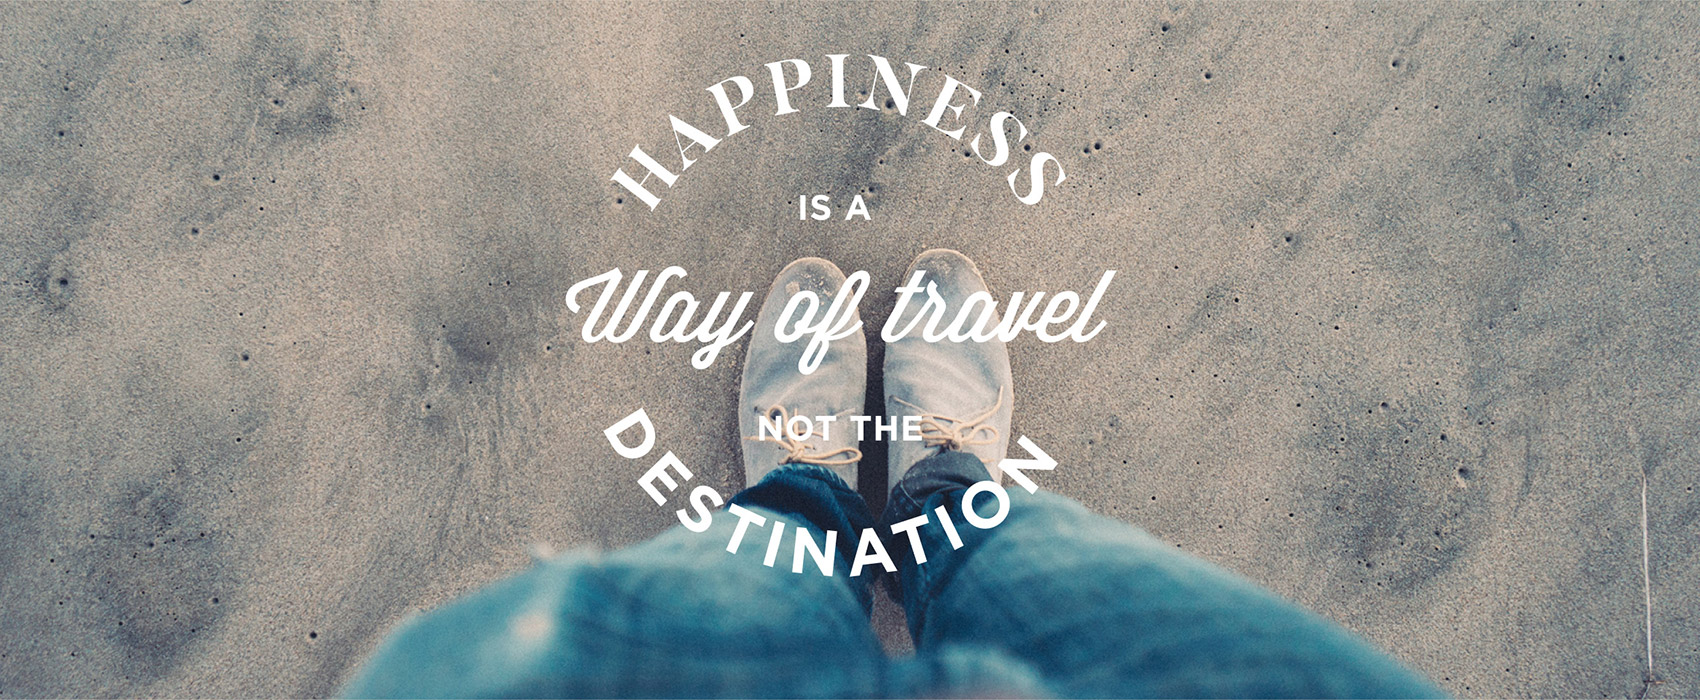 Happiness Is A Way Of Travel And Not The Destination - Kosha